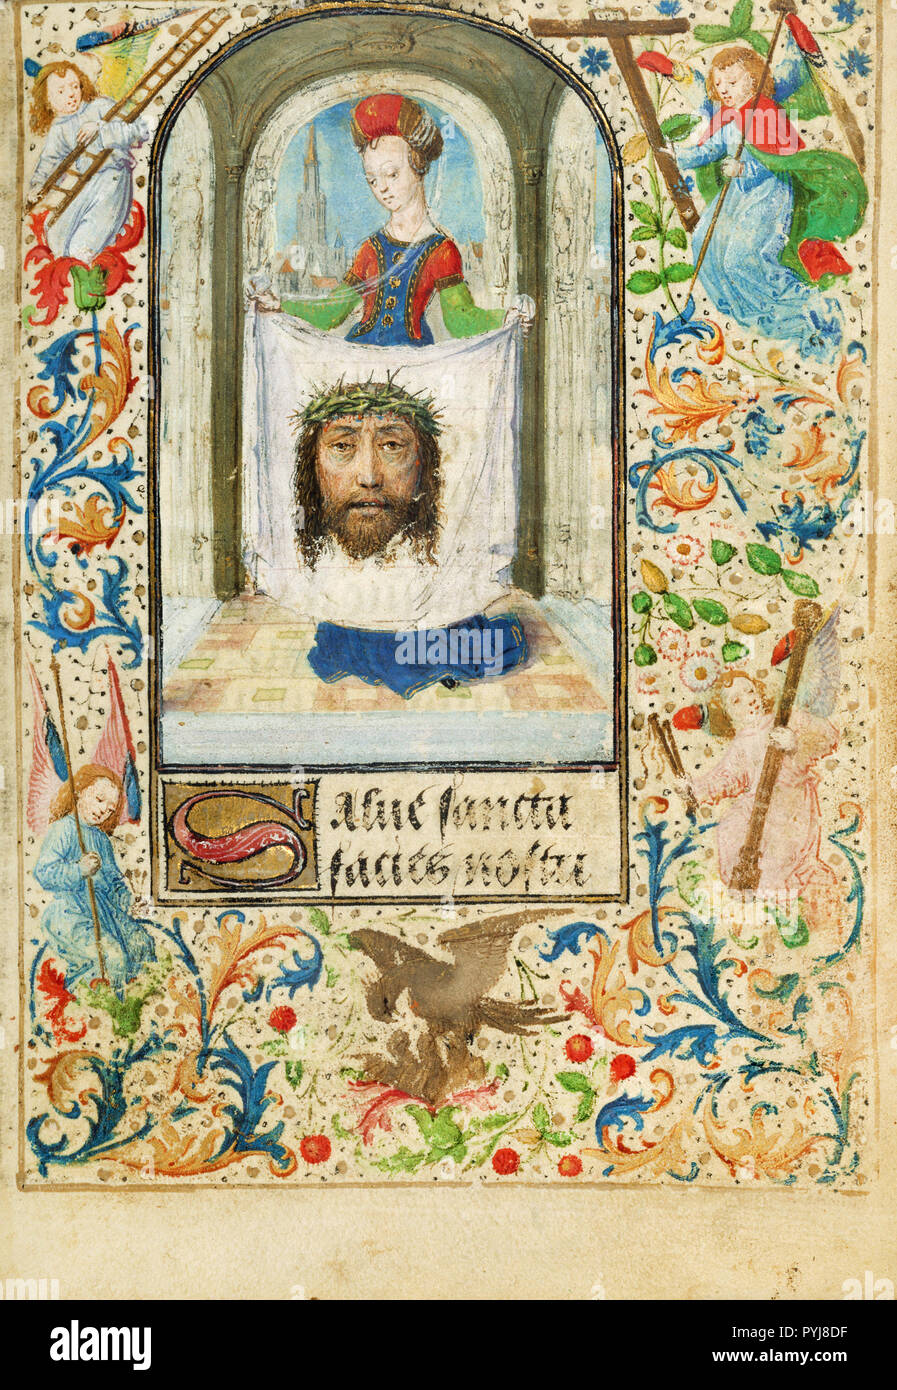 Lieven van Lathem, Saint Veronica, Circa 1471 Tempera colors, gold leaf, gold, silver, ink on parchment, The J. Paul Getty Museum, Los Angeles, USA. Stock Photo